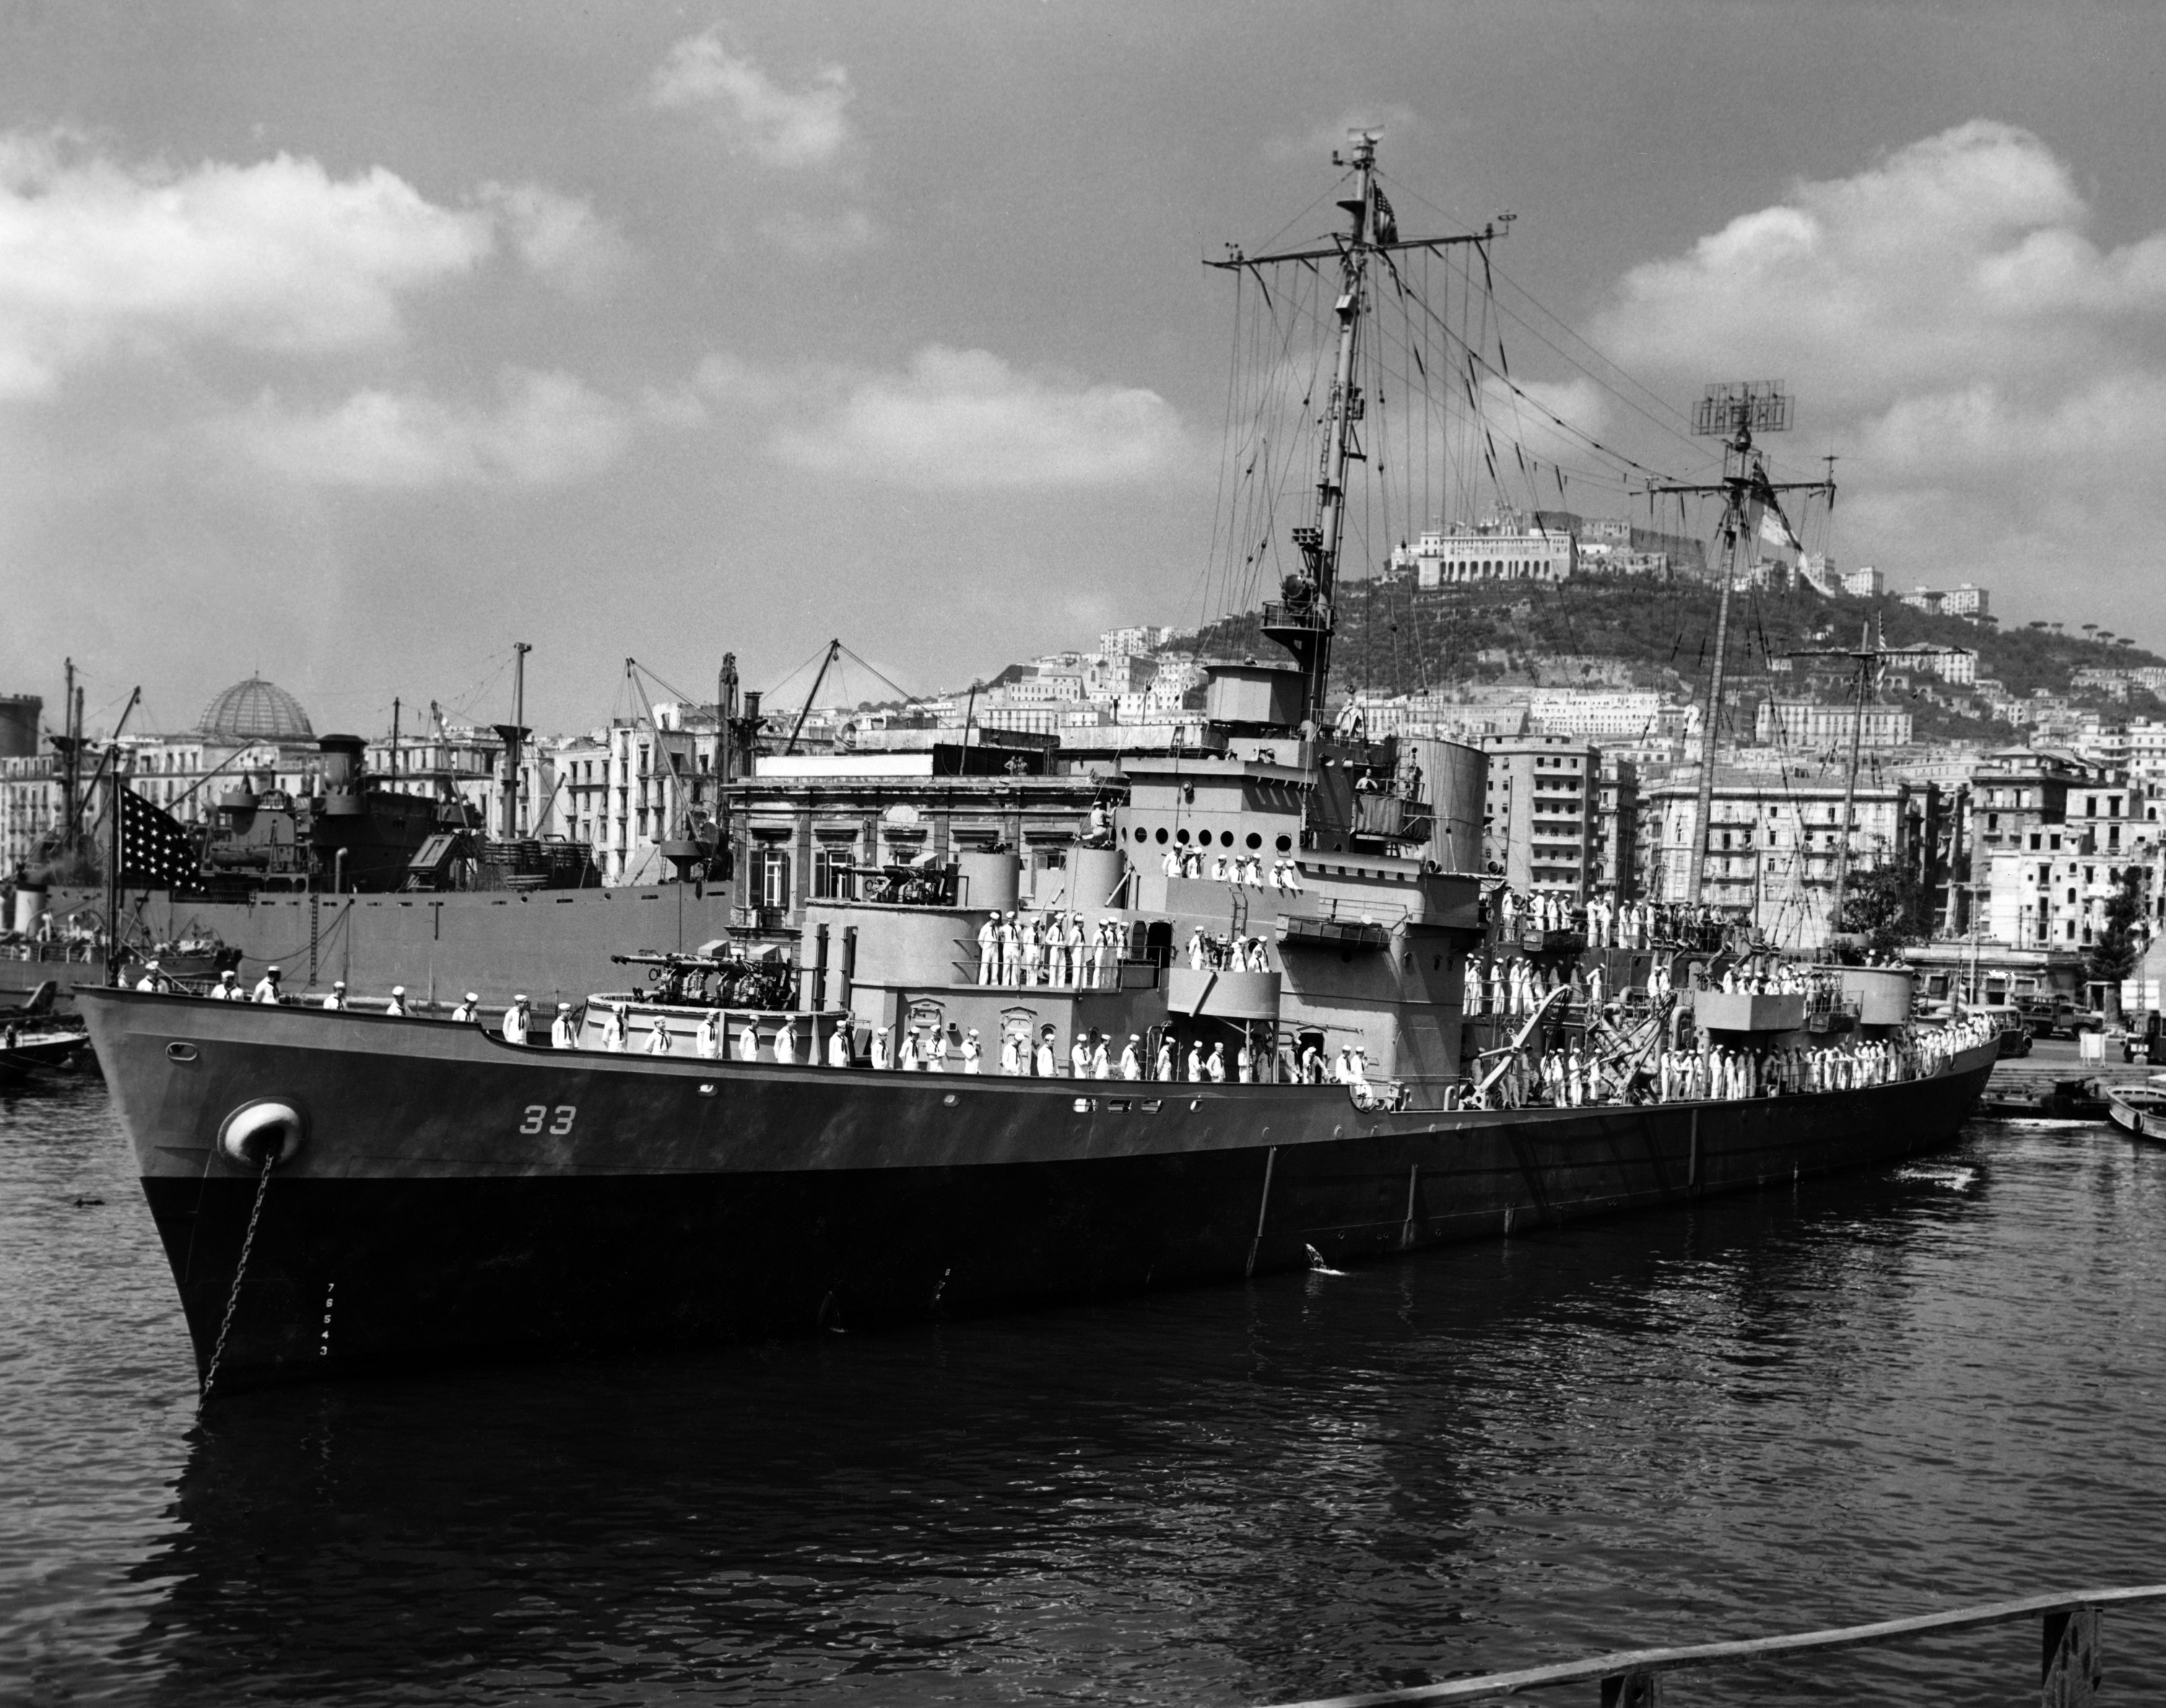 This photograph is of the USS Duane and its crew in Naples, Italy. According to the official USCG history, the ship was docked in Naples approximately six different times between May 1944 and August 1944. The longest stay being from July 30th until August 9th. It is likely that the photograph was taken during this ten day stretch. Although it is not marked, Dale Rooks was the likely photographer for this image as he took several others in John Baker's Warbook in the weeks after this was likely taken.

On the left hand side of this photo, you can see a Dome which is the San Francesco di Paola Church. The building in the middle right of the photo (on top of the hill) is the Certosa di San Martino, which is now a museum. A current image can be compared here. View full size